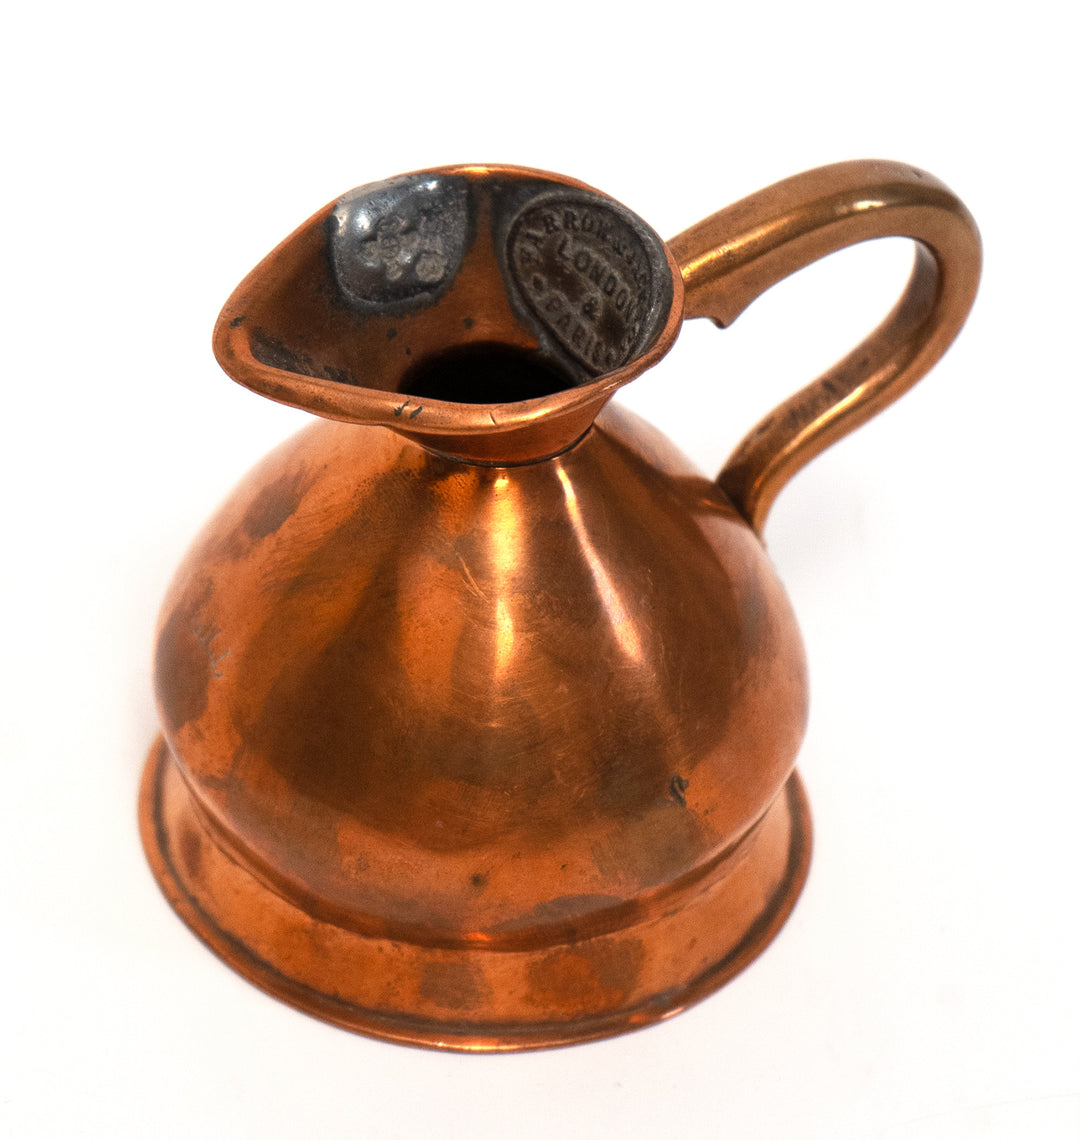 Set of Copper Measuring Cups